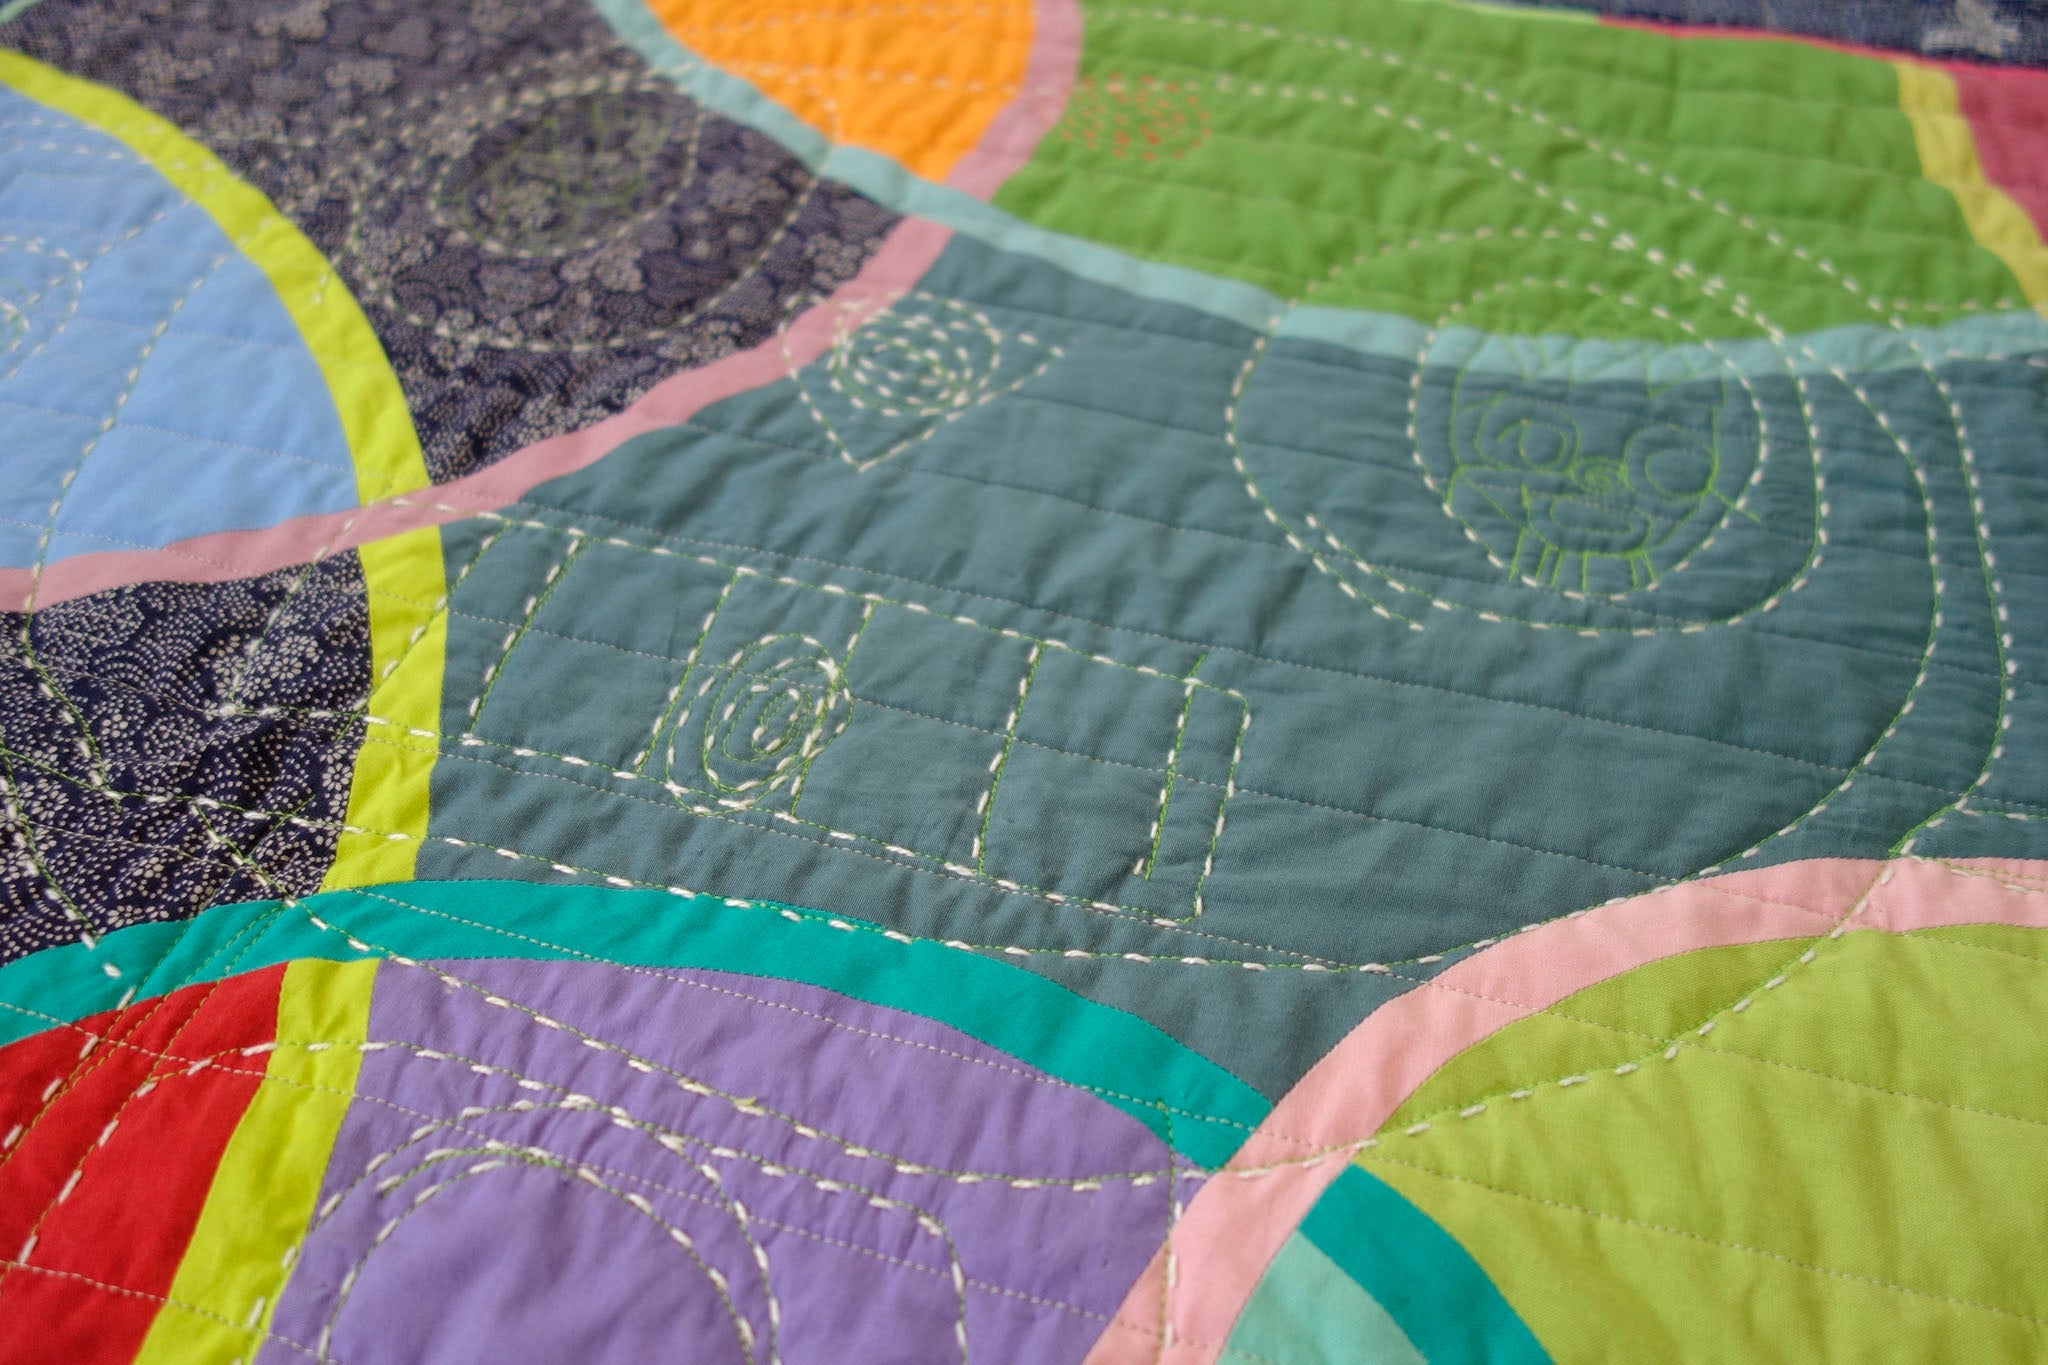 Watermelon From Mars quilt by Patricia Belyea